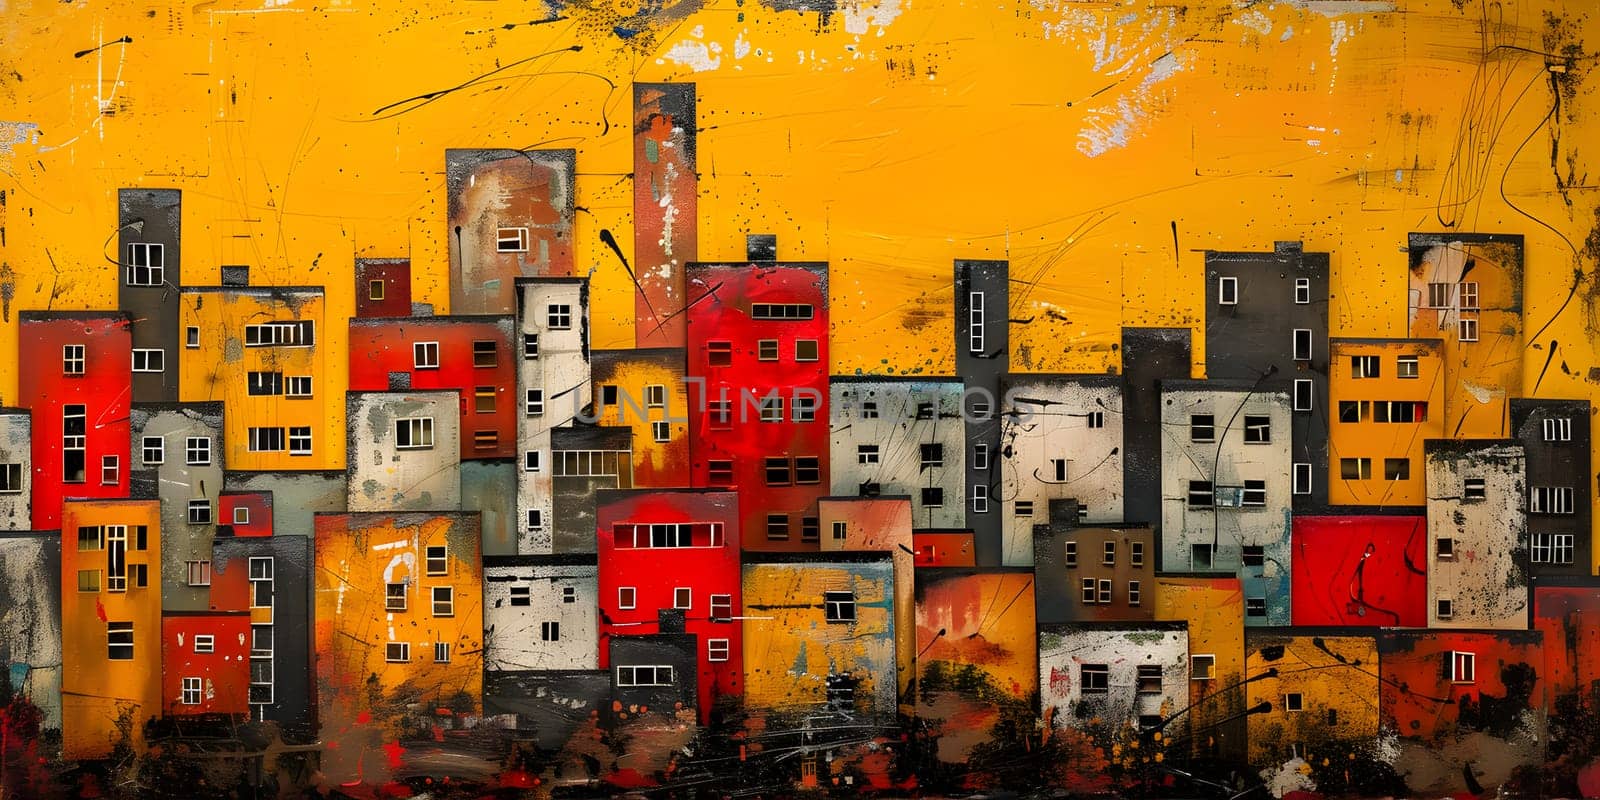 A vibrant urban design painting depicting a city skyline with tall buildings and rectangular windows against a yelloworange background, showcasing the world of art and architecture